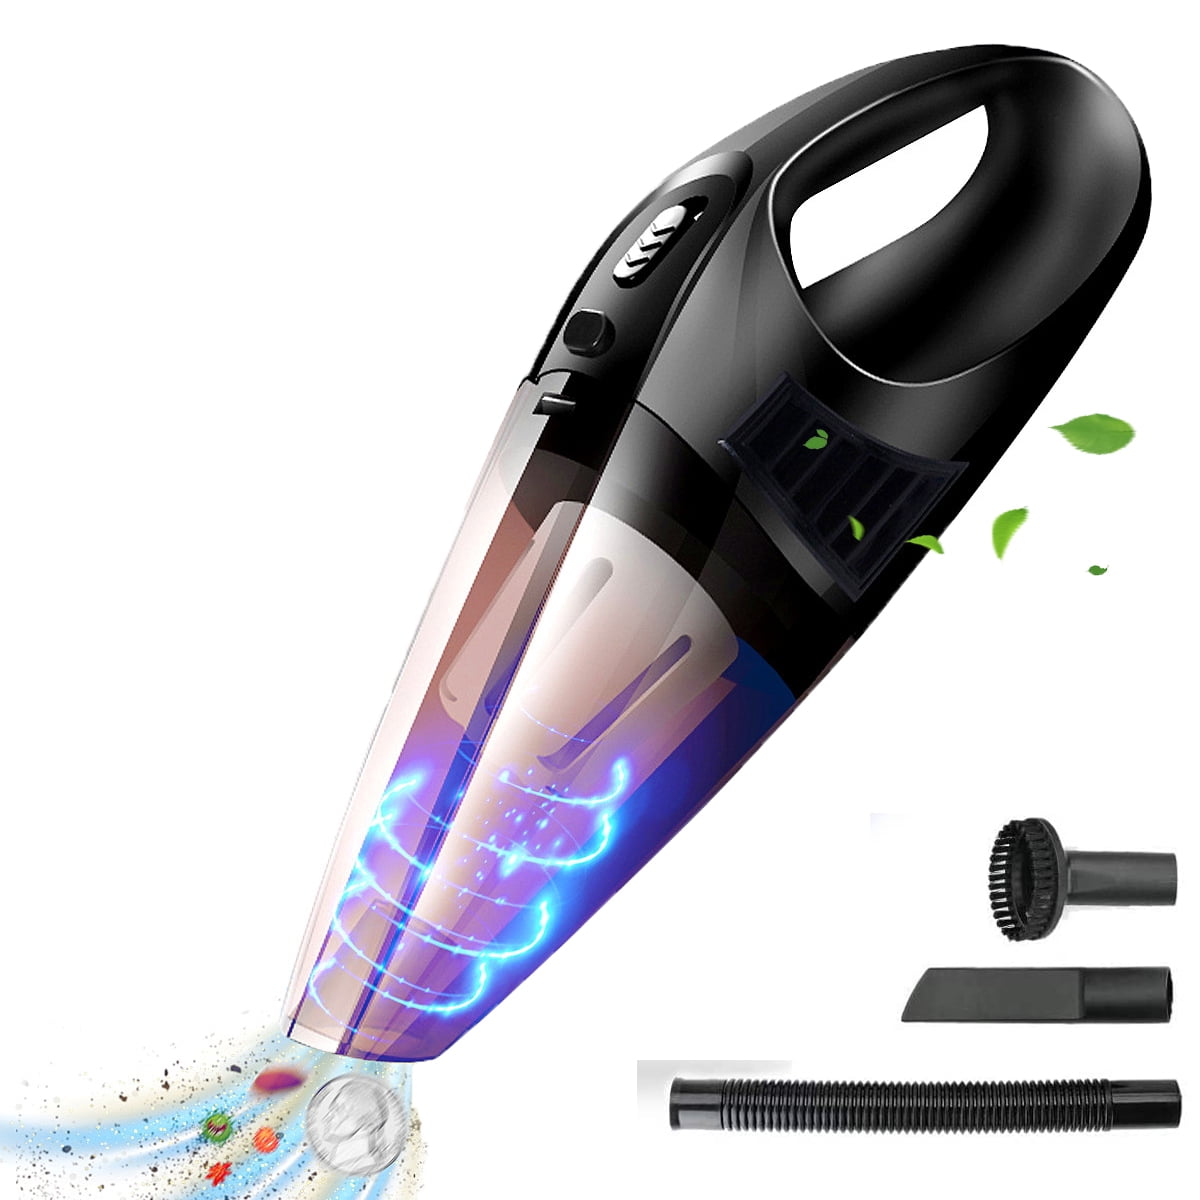 Car Vacuum, 3200PA Corded Small Vacuum Cleaner, High Power, Wet Dry Use